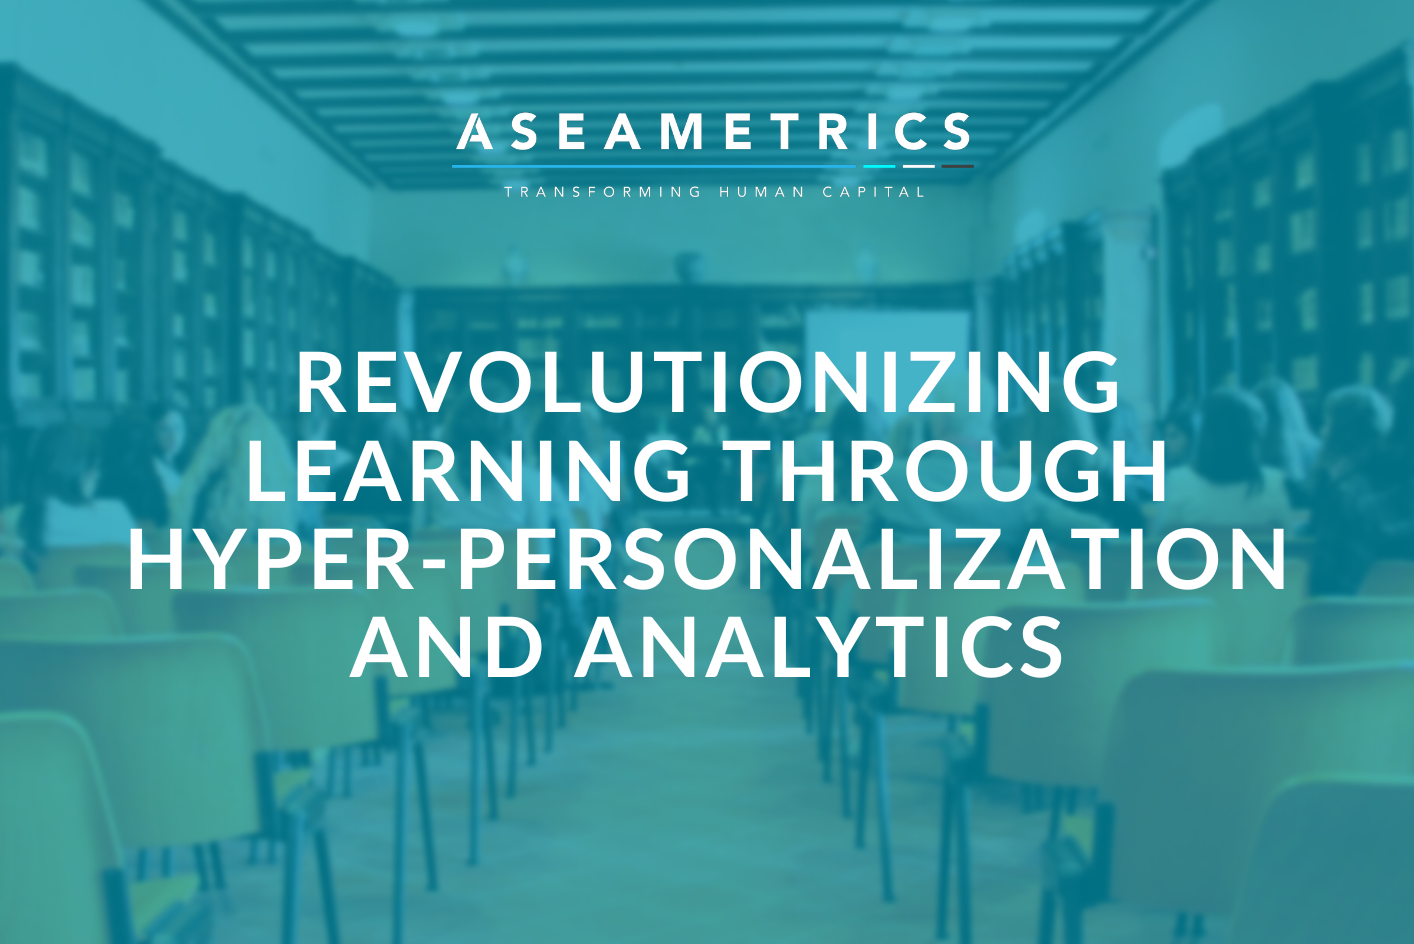 REVOLUTIONIZING LEARNING THROUGH HYPER-PERSONALIZATION AND ANALYTICS